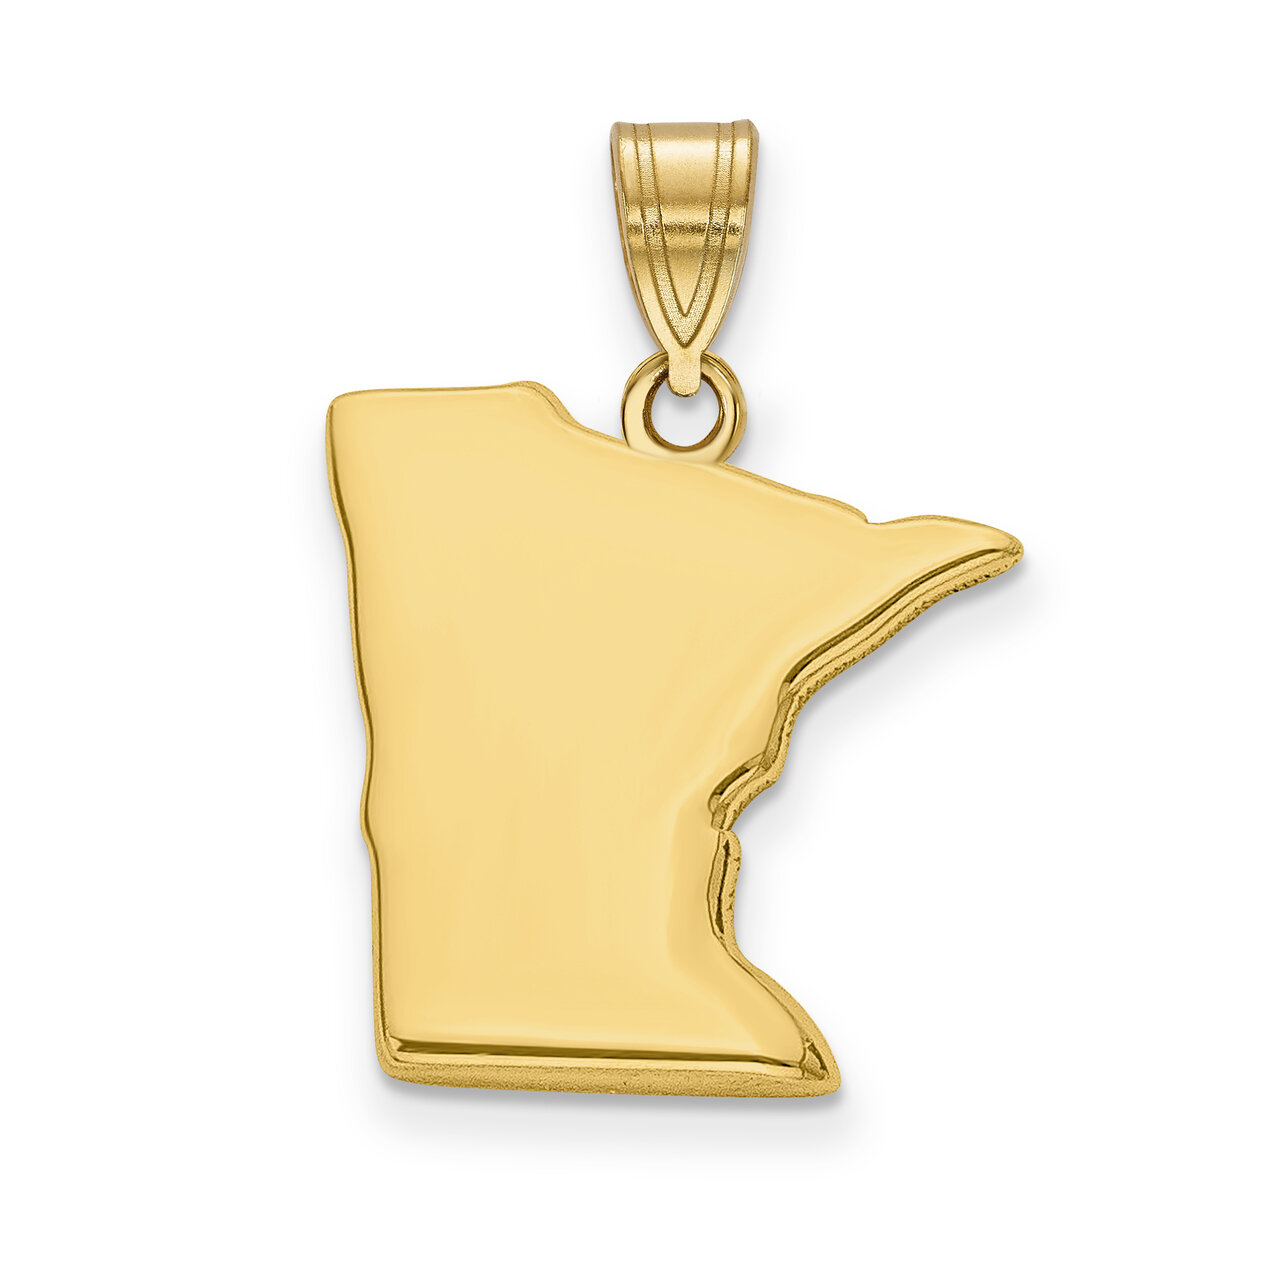 Minnesota State Pendant Charm Gold-plated on Silver Engravable XNA707GP-MN